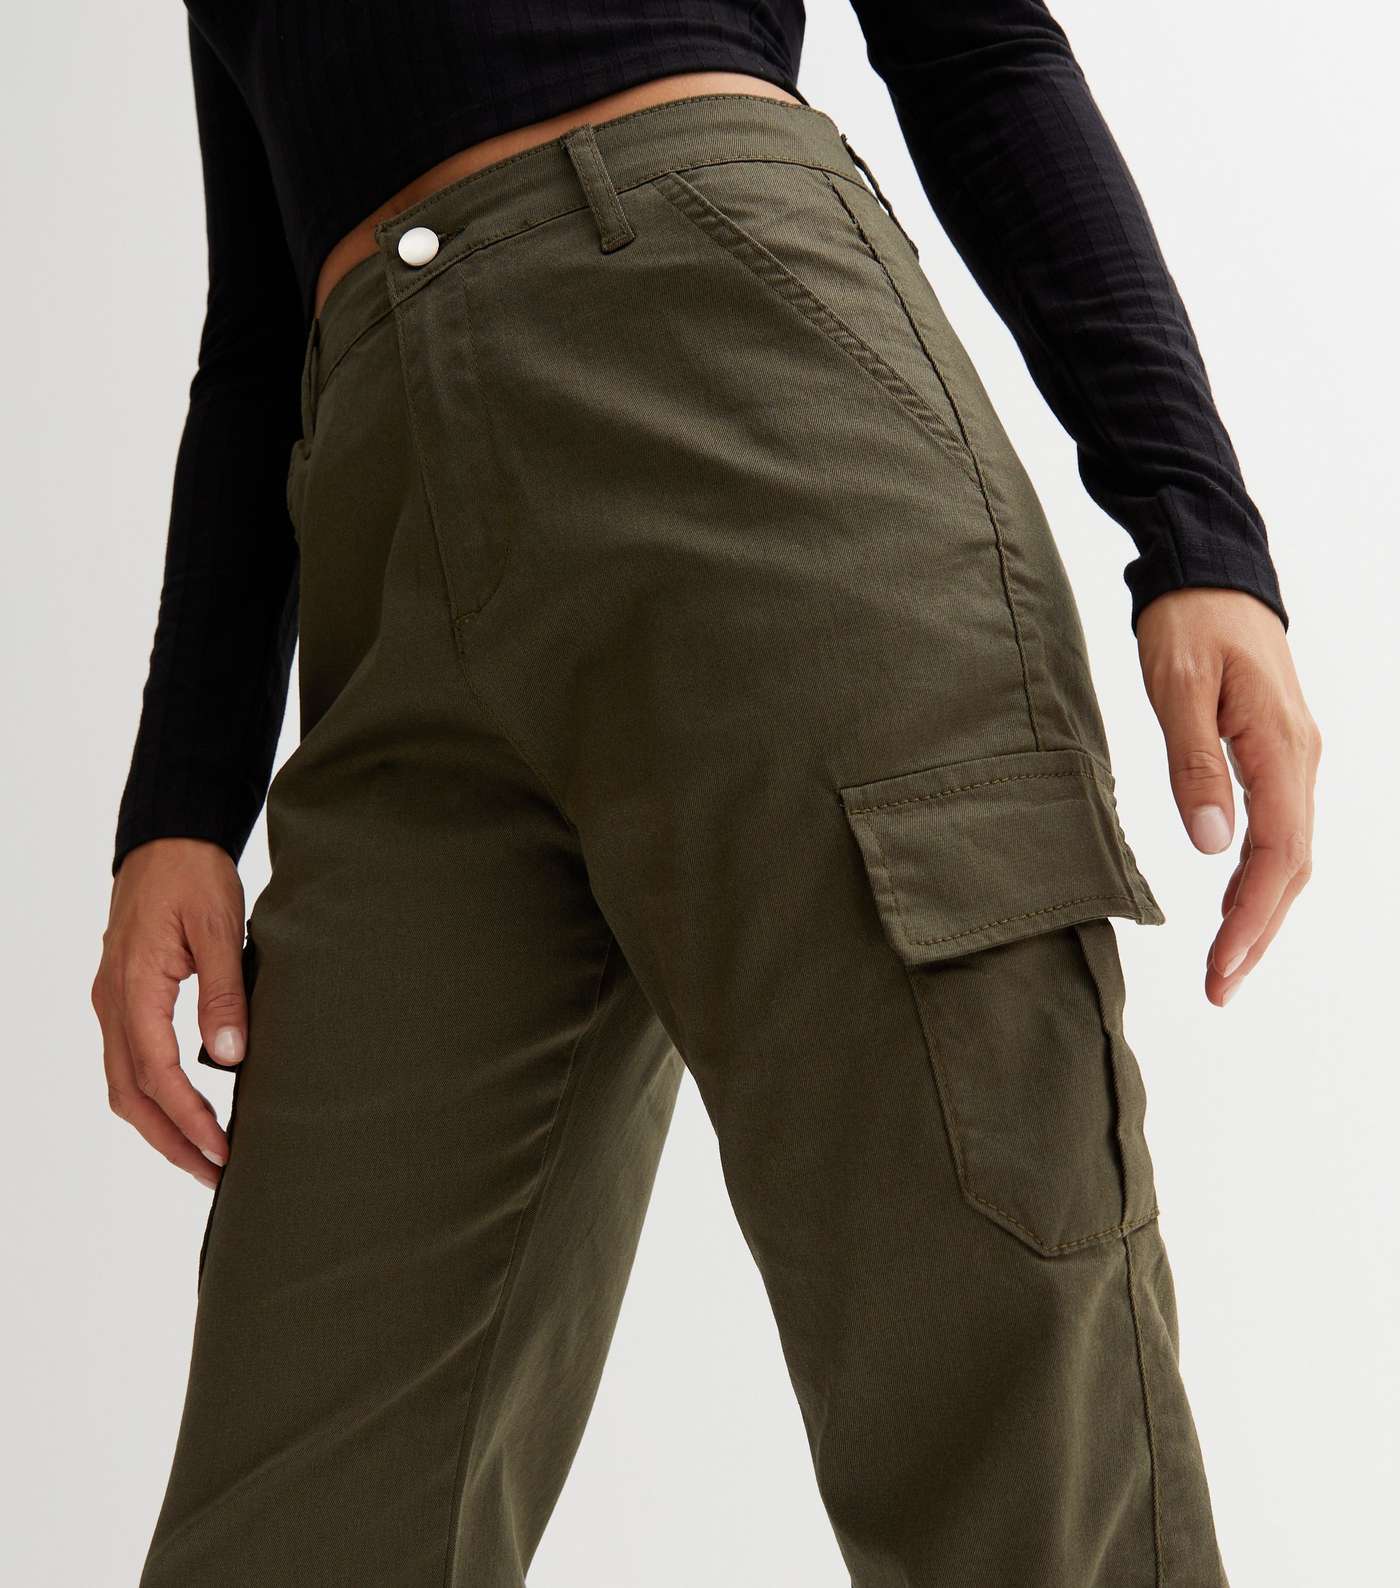 Urban Bliss Olive Cuffed Cargo Joggers Image 3